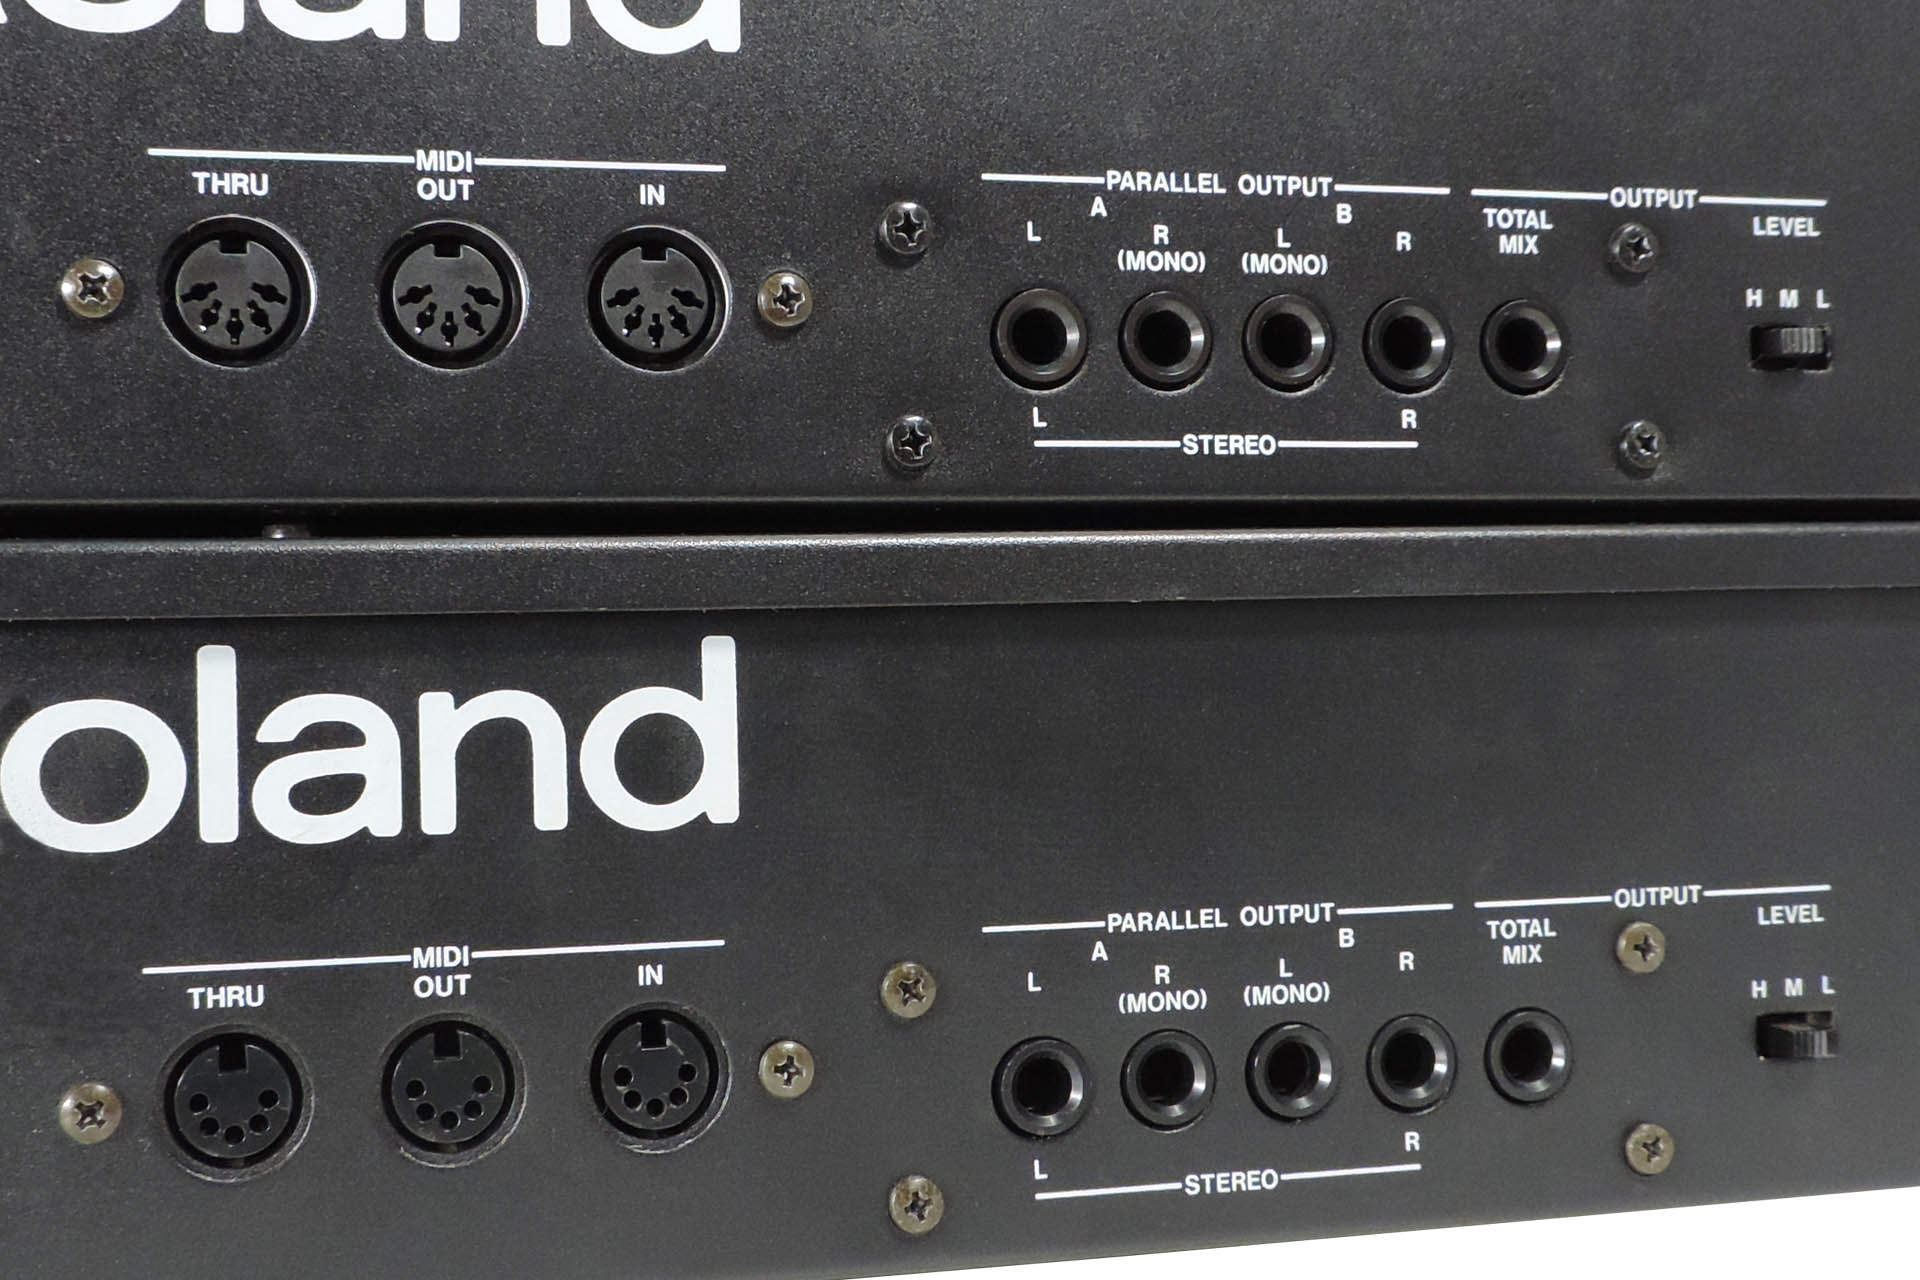 Nebula balanced outputs jack board for the Roland MKS-70 is very discrete